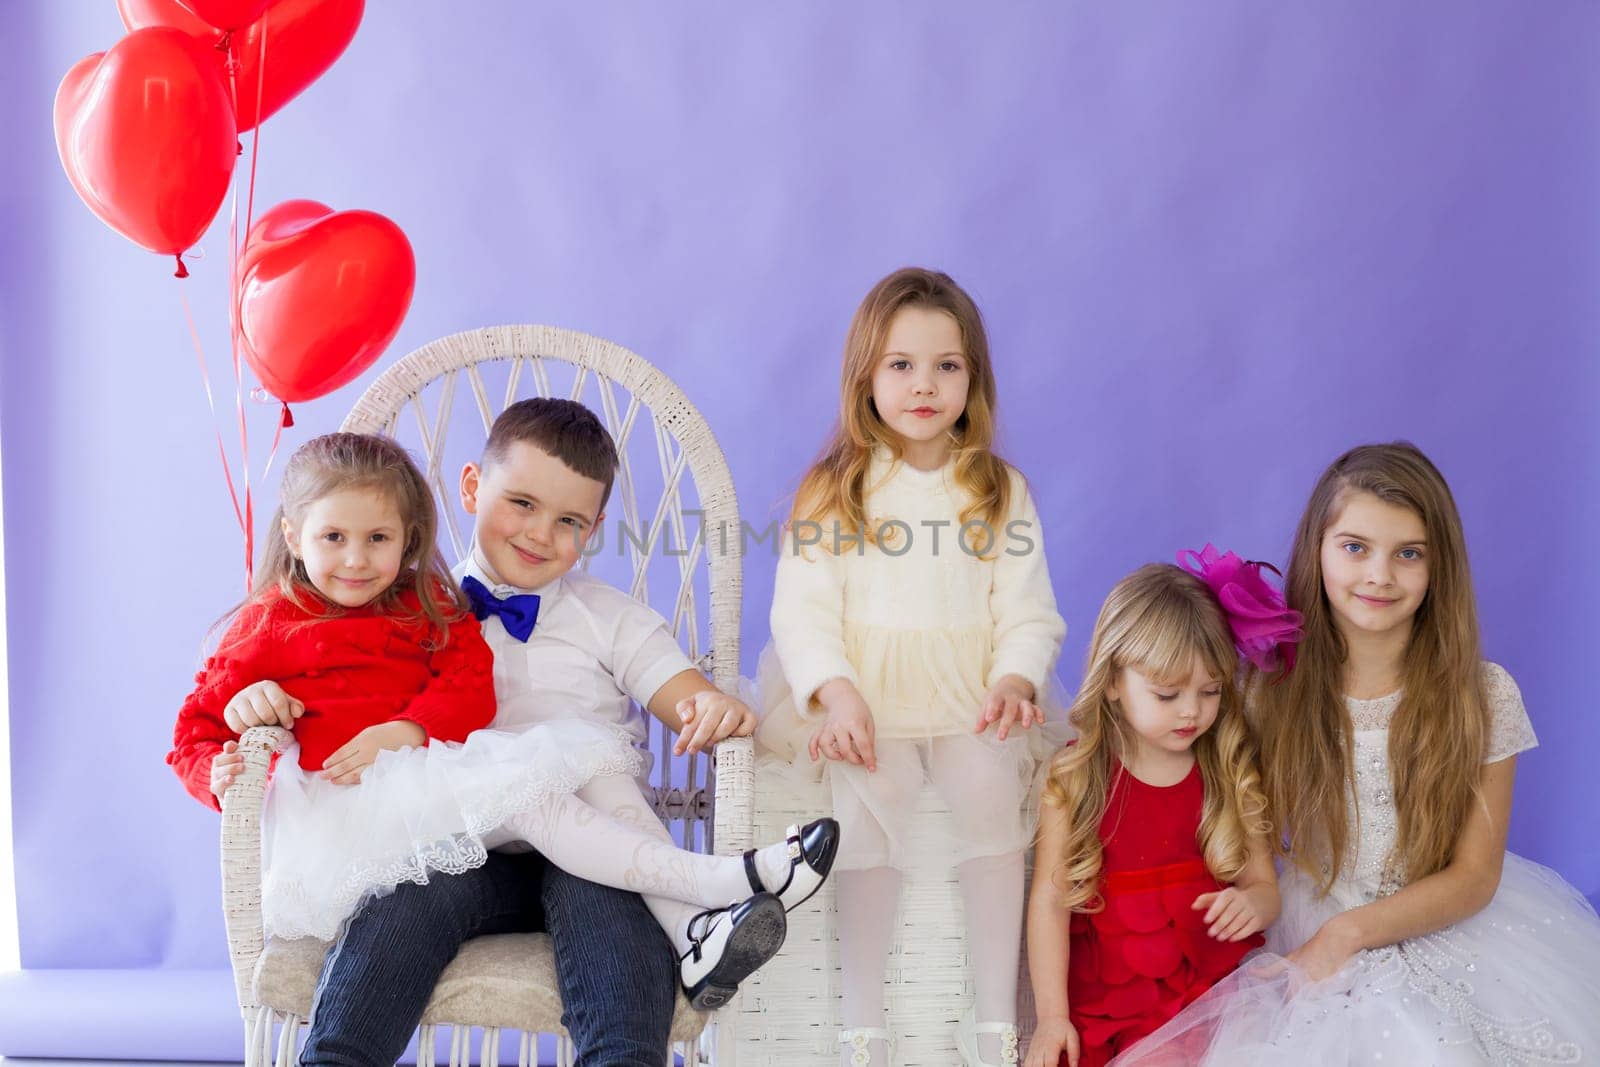 Boy and girls with red heart-shaped balloons on holiday by Simakov